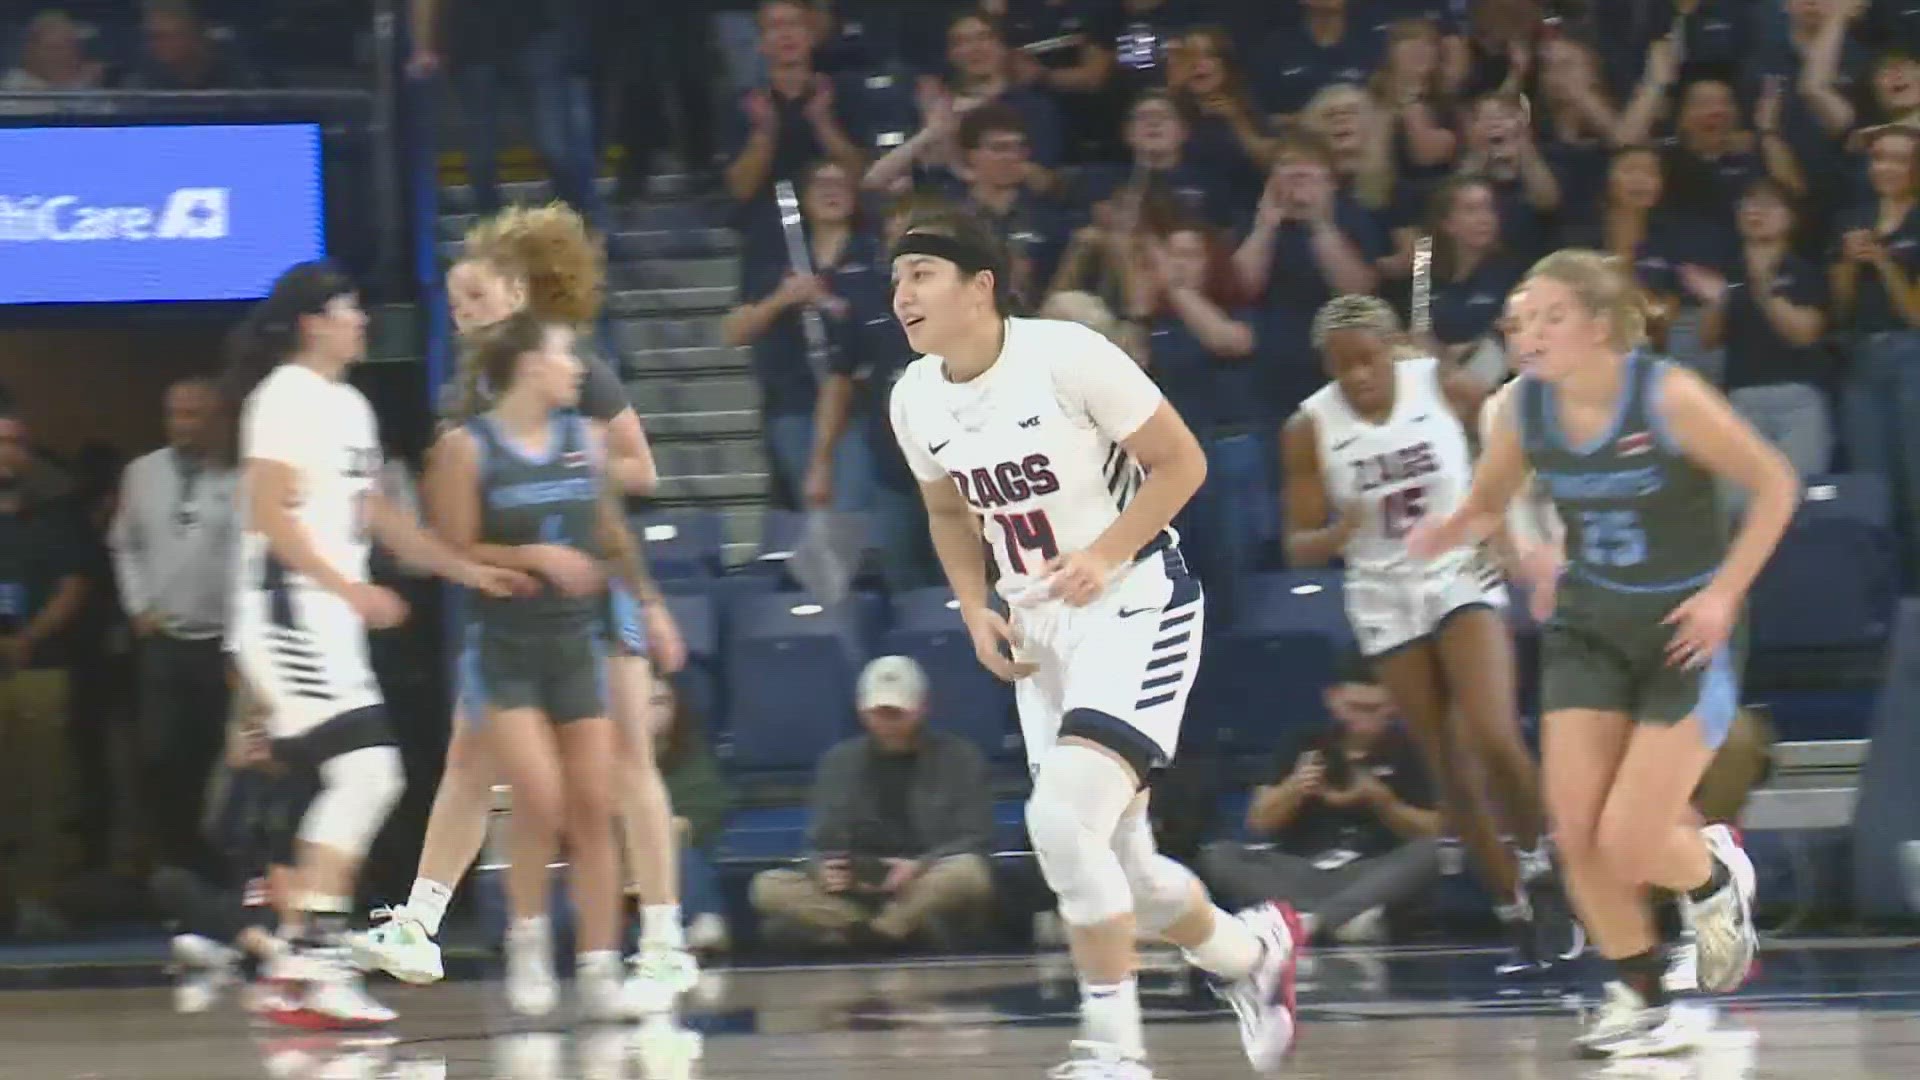 Gonzaga women's basketball topped Warner Pacific 95-32 in the Bulldogs final tune-up before the regular season begins.